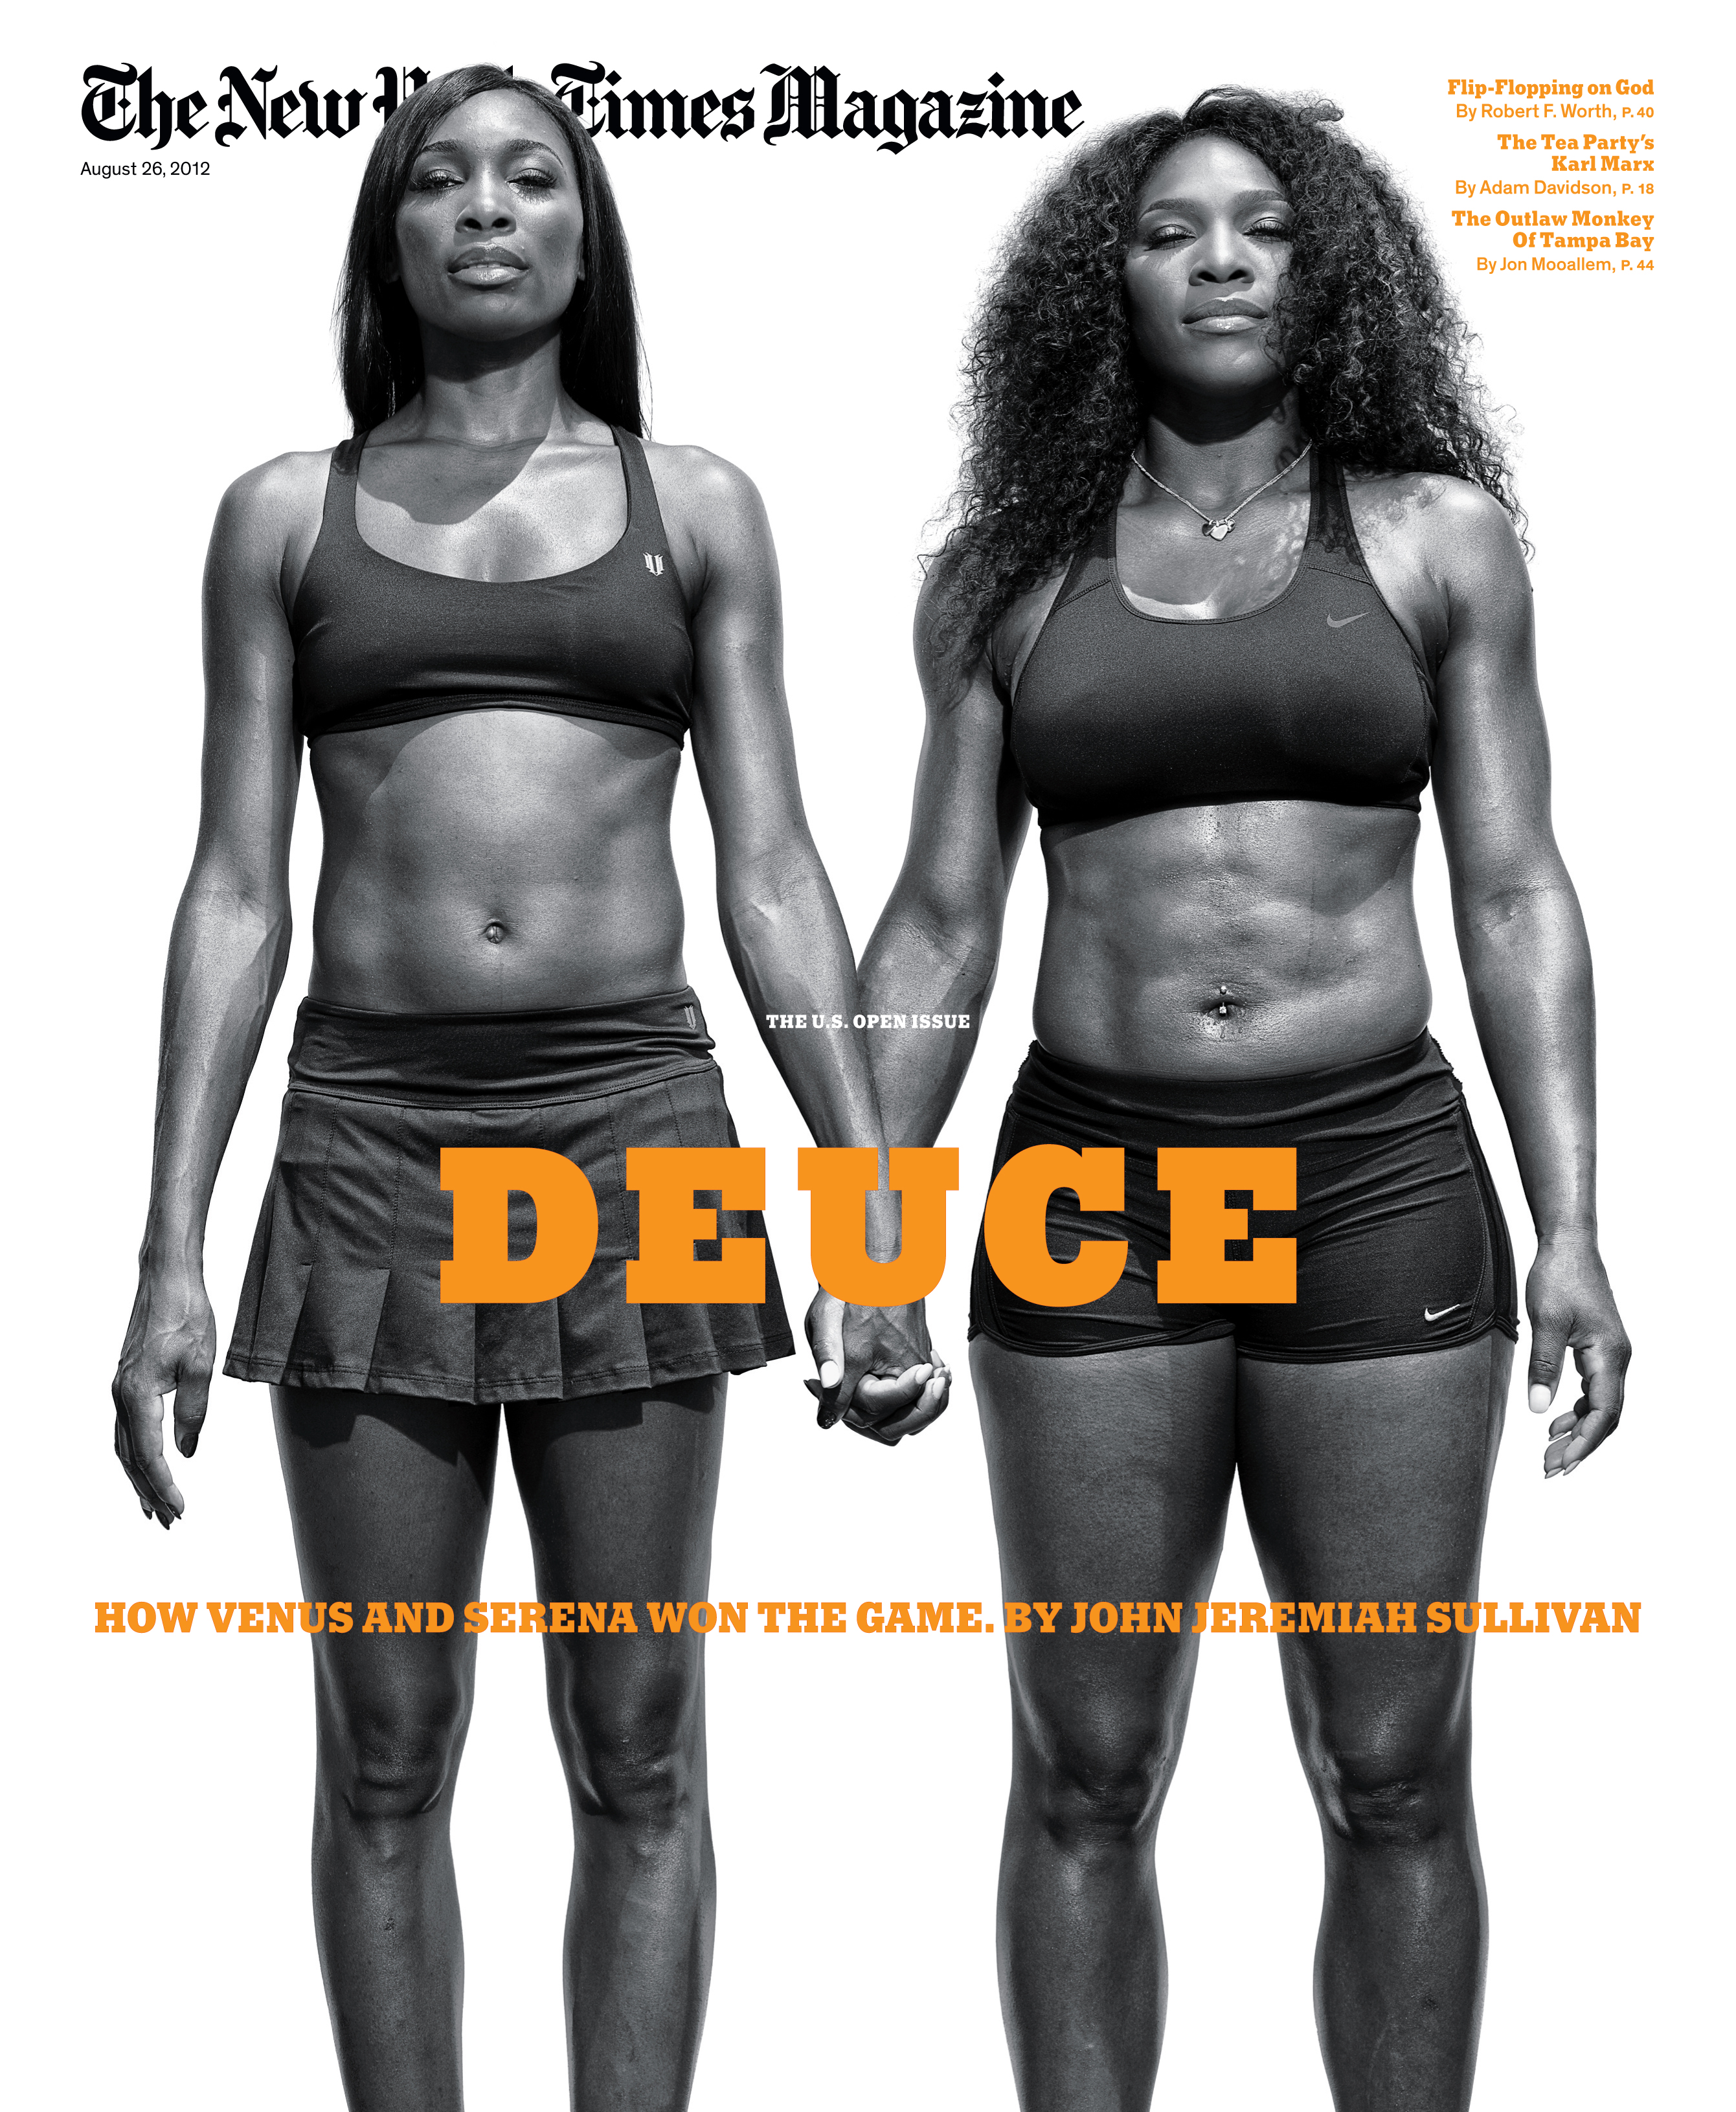 The New York Times Magazine-August 26, 2012: "Deuce"